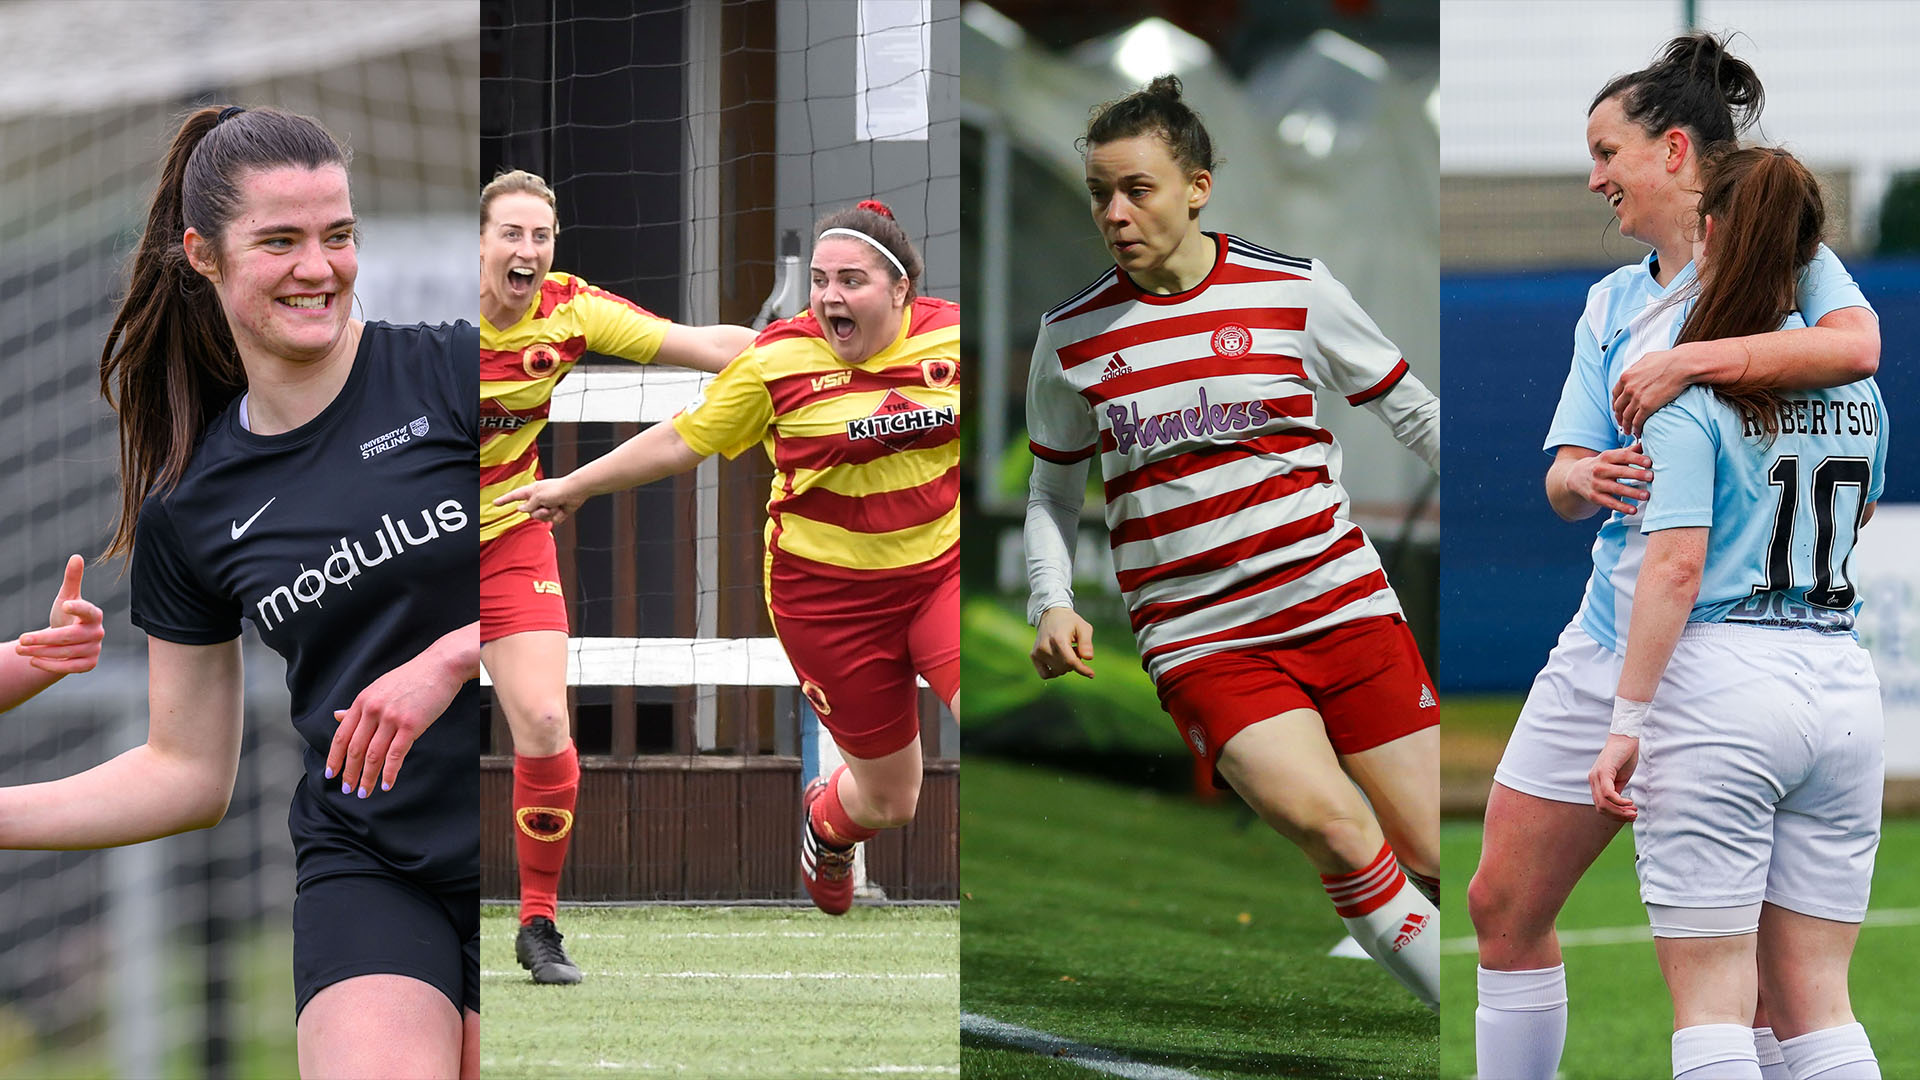 SWPL season concludes with Play-off Finals